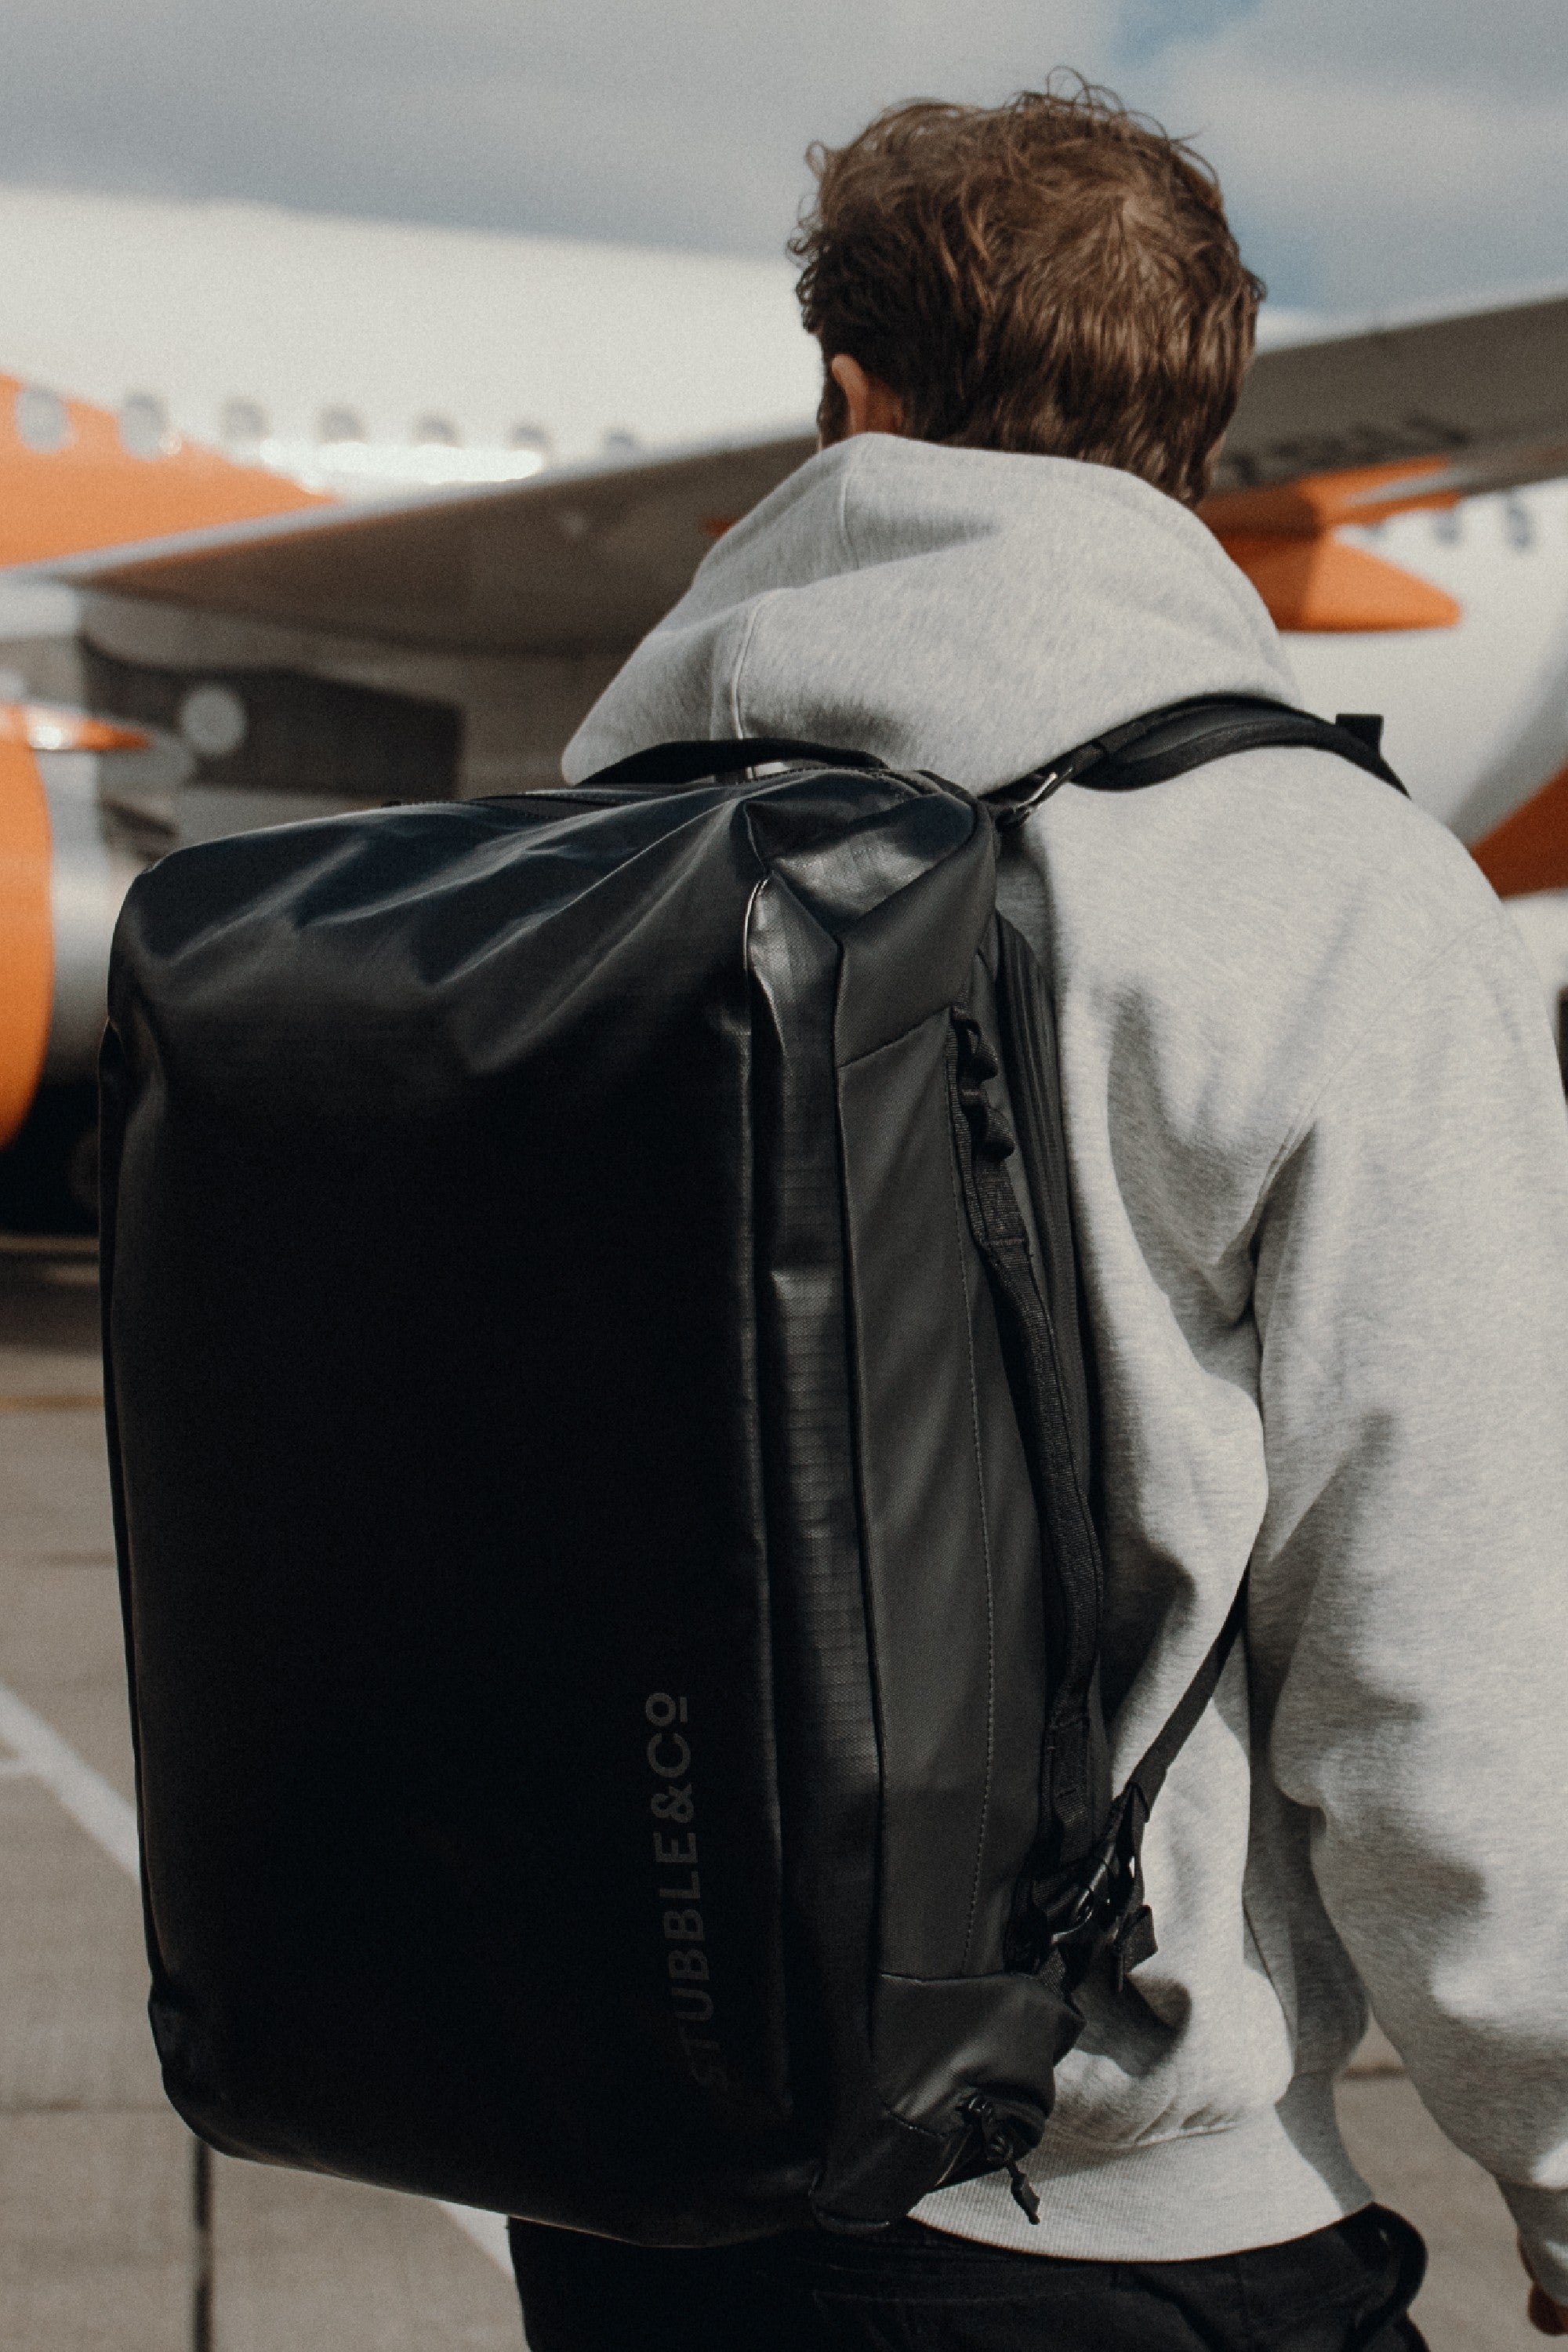 Man wearing 30l backpack by a plane